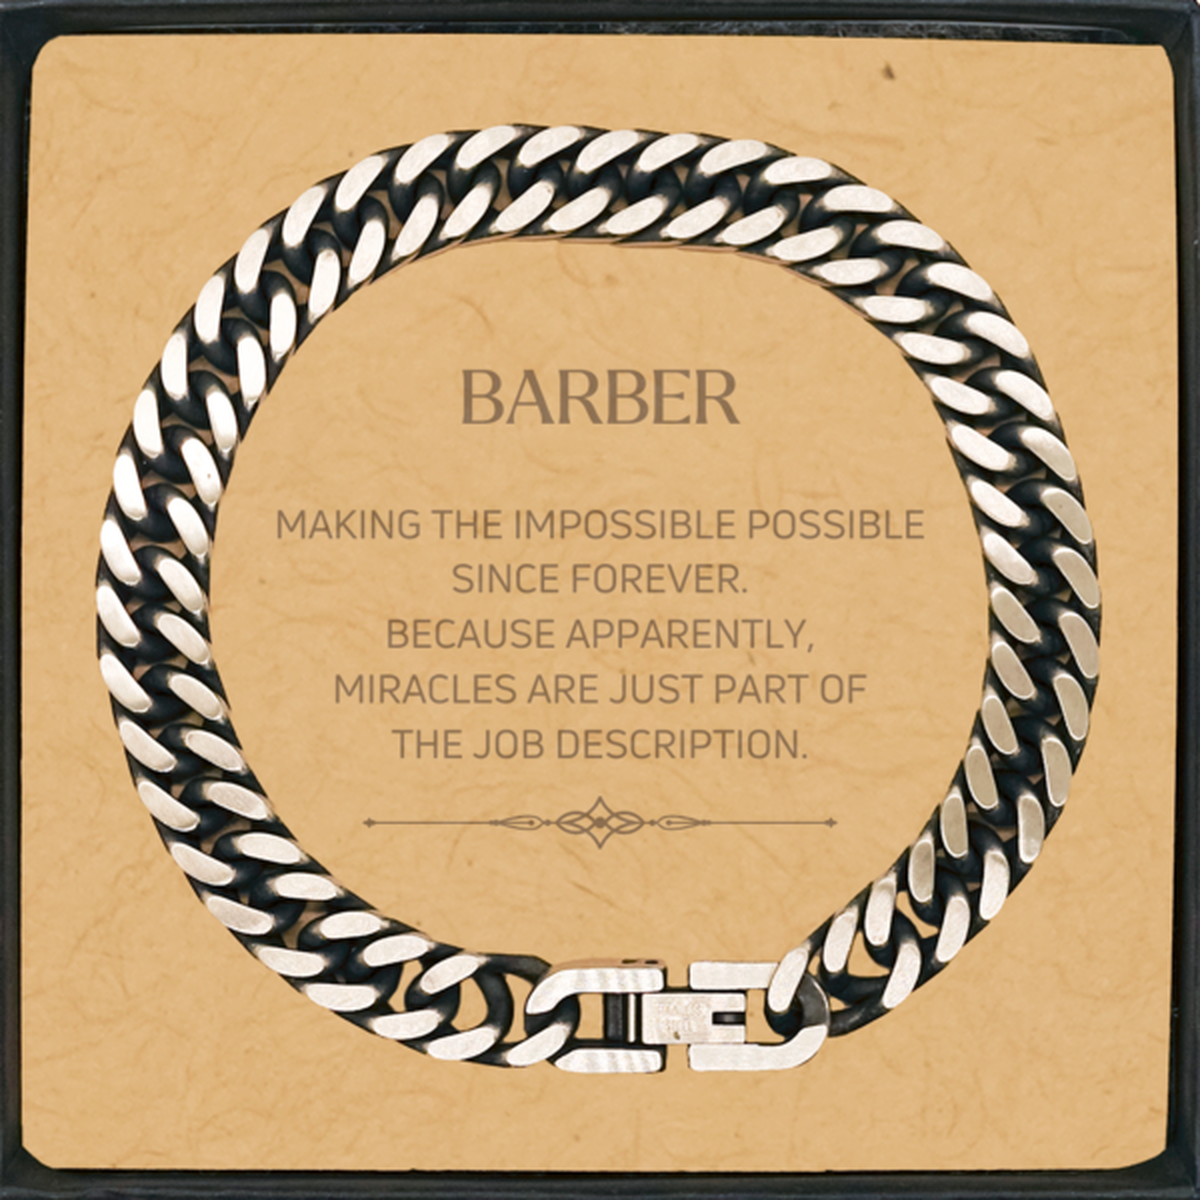 Funny Barber Gifts, Miracles are just part of the job description, Inspirational Birthday Cuban Link Chain Bracelet For Barber, Men, Women, Coworkers, Friends, Boss